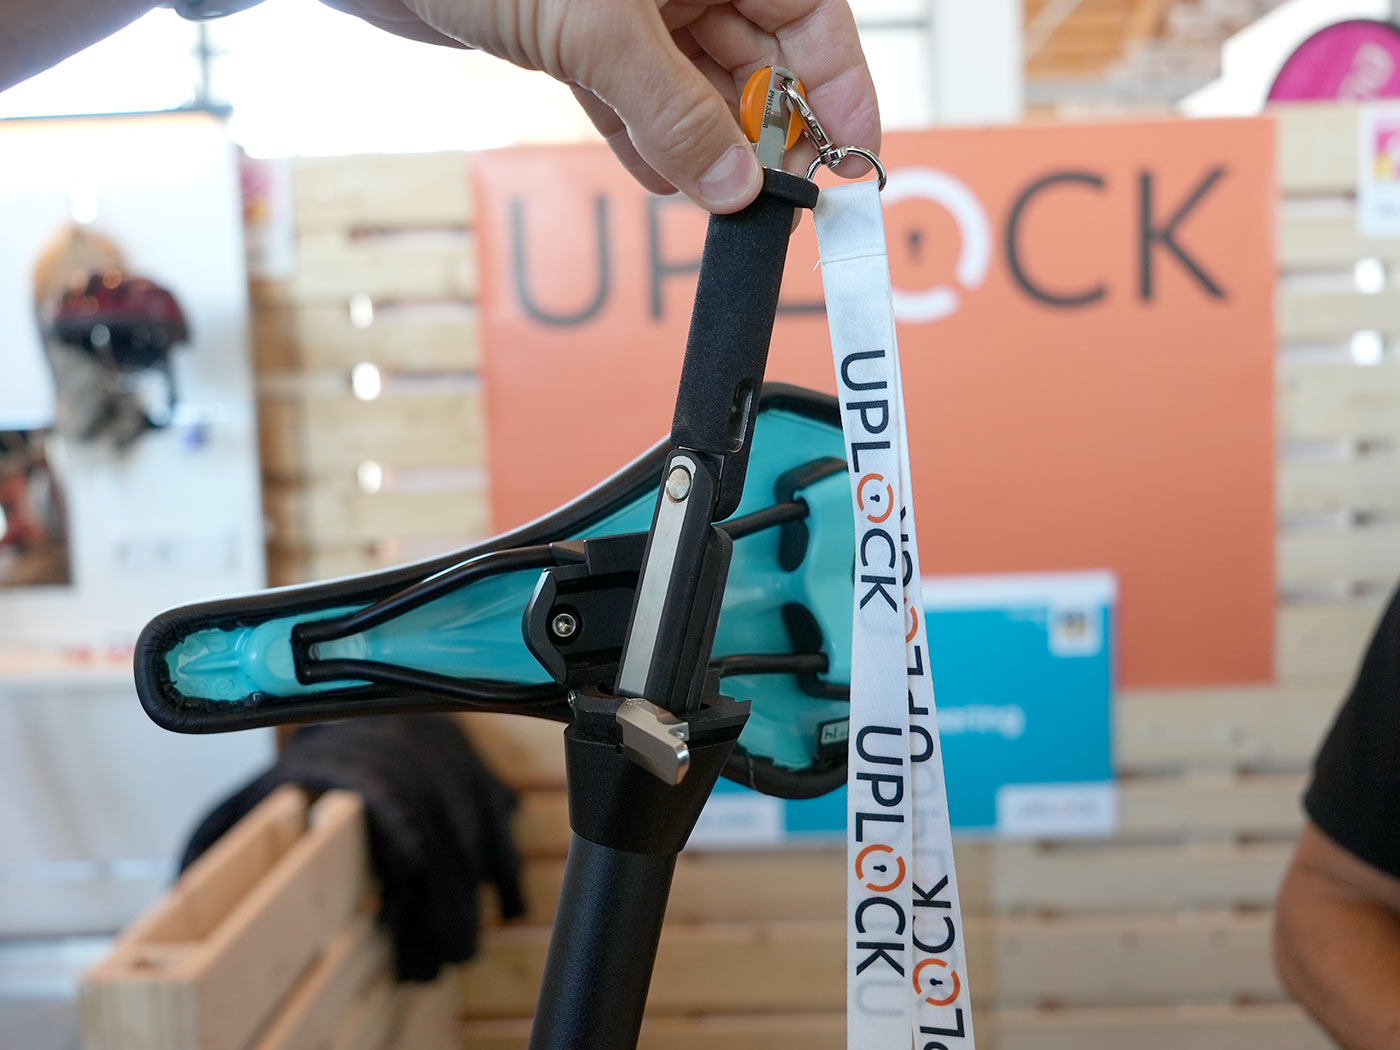 uplock bicycle lock that hides in your seatpost